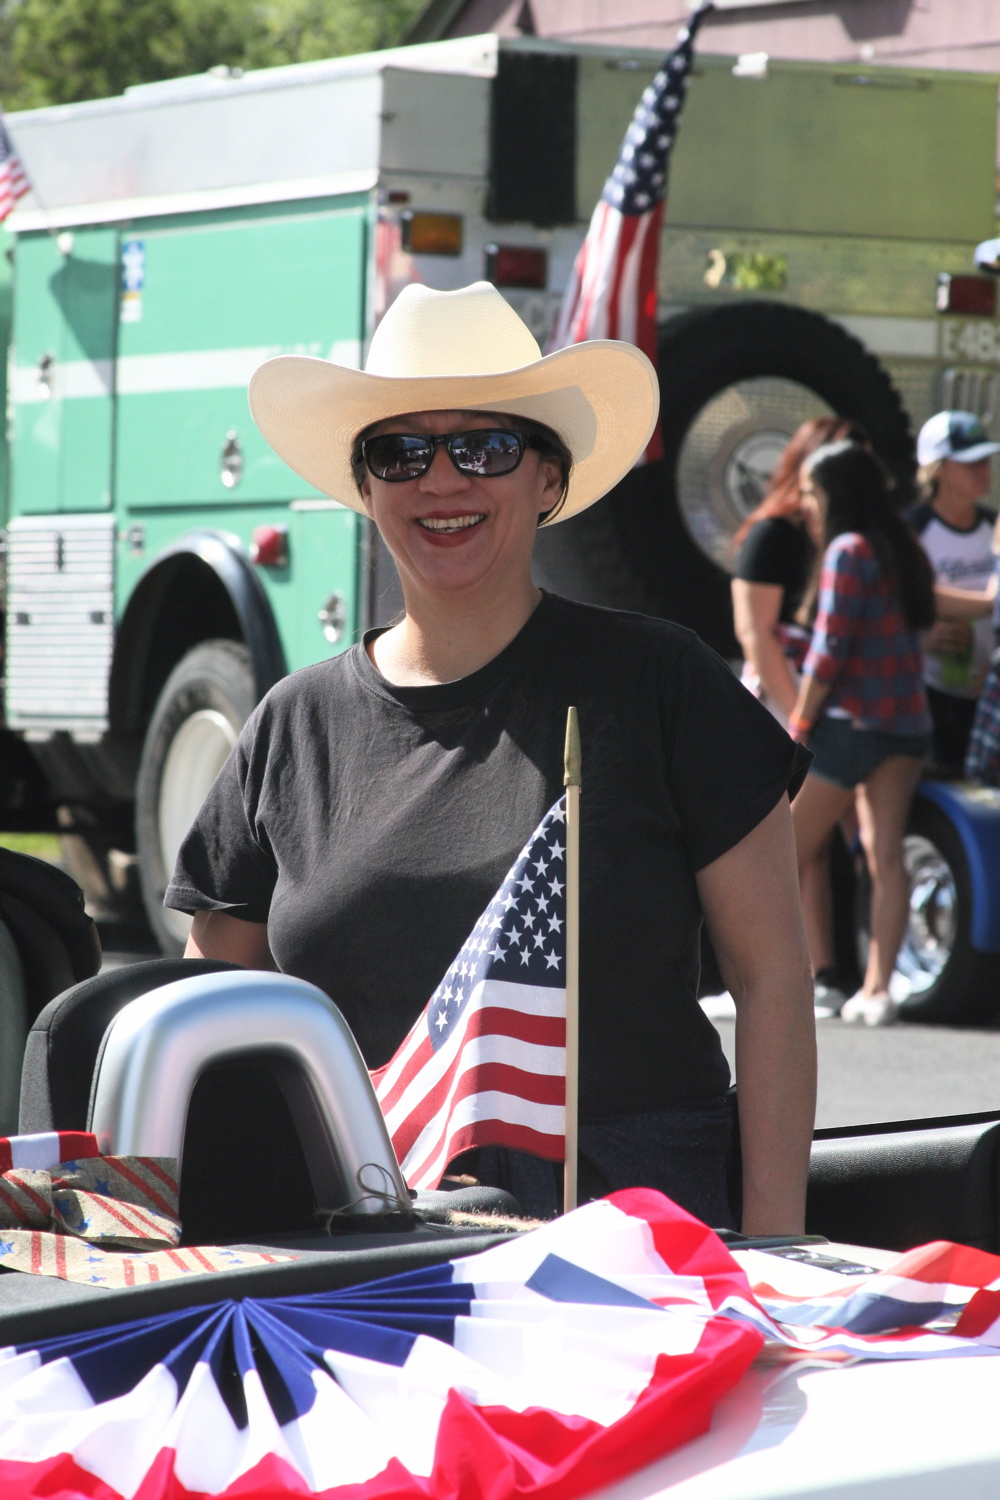 07-04-18 Flagstaff 4th of July Parade-03